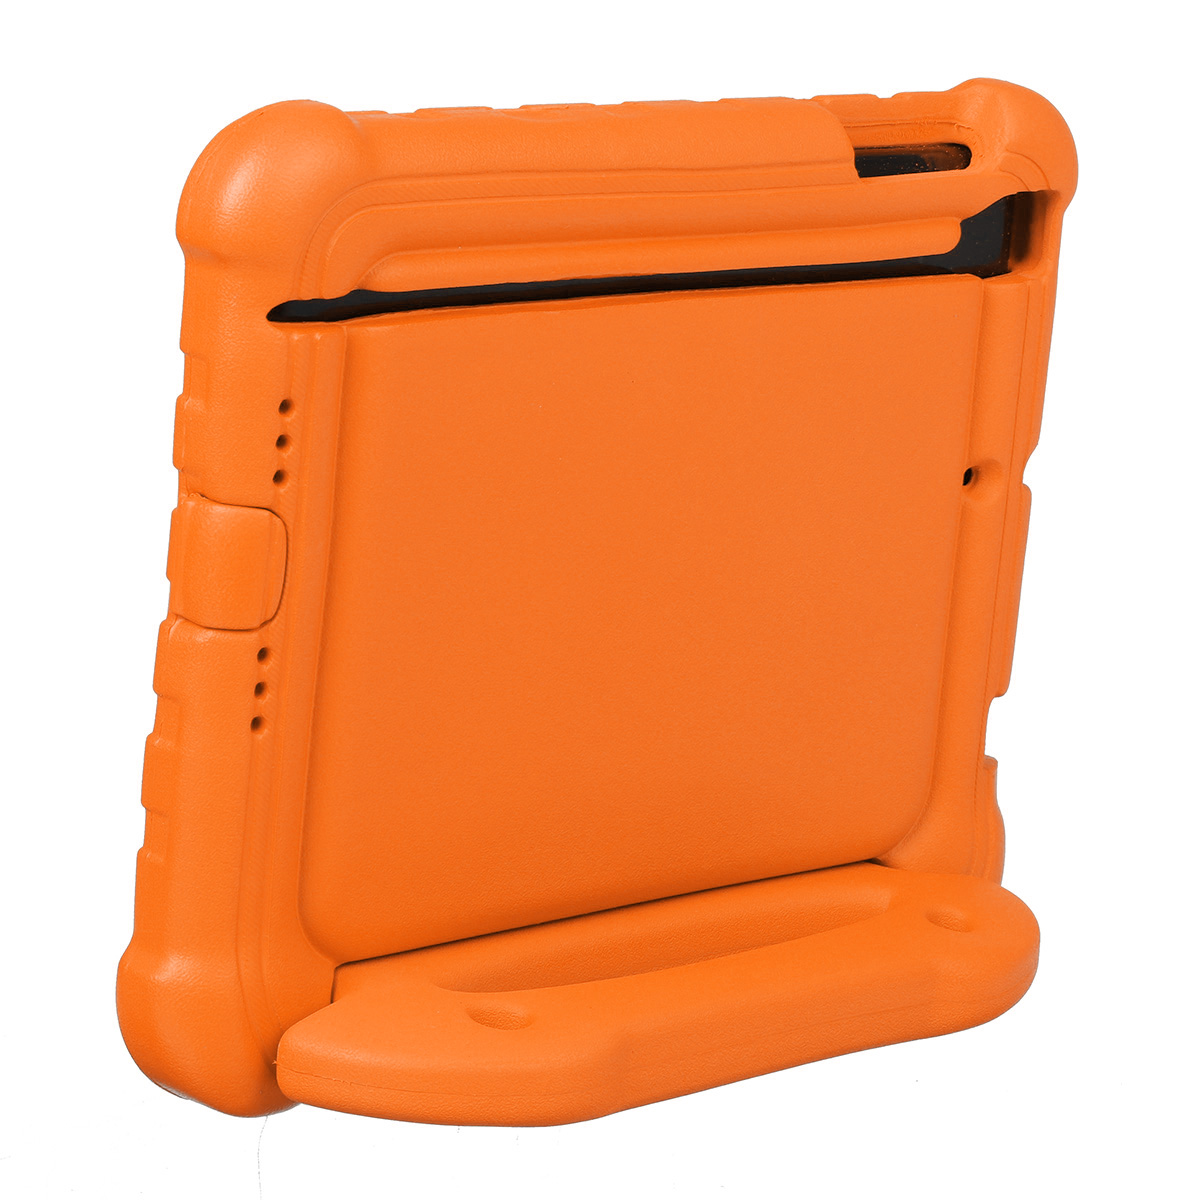 Portable-Kids-Friendly-Safe-EVA-with-Handle-Bracket-Stand-Tablet-Shockproof-Protective-Case-for-iPad-1777875-5